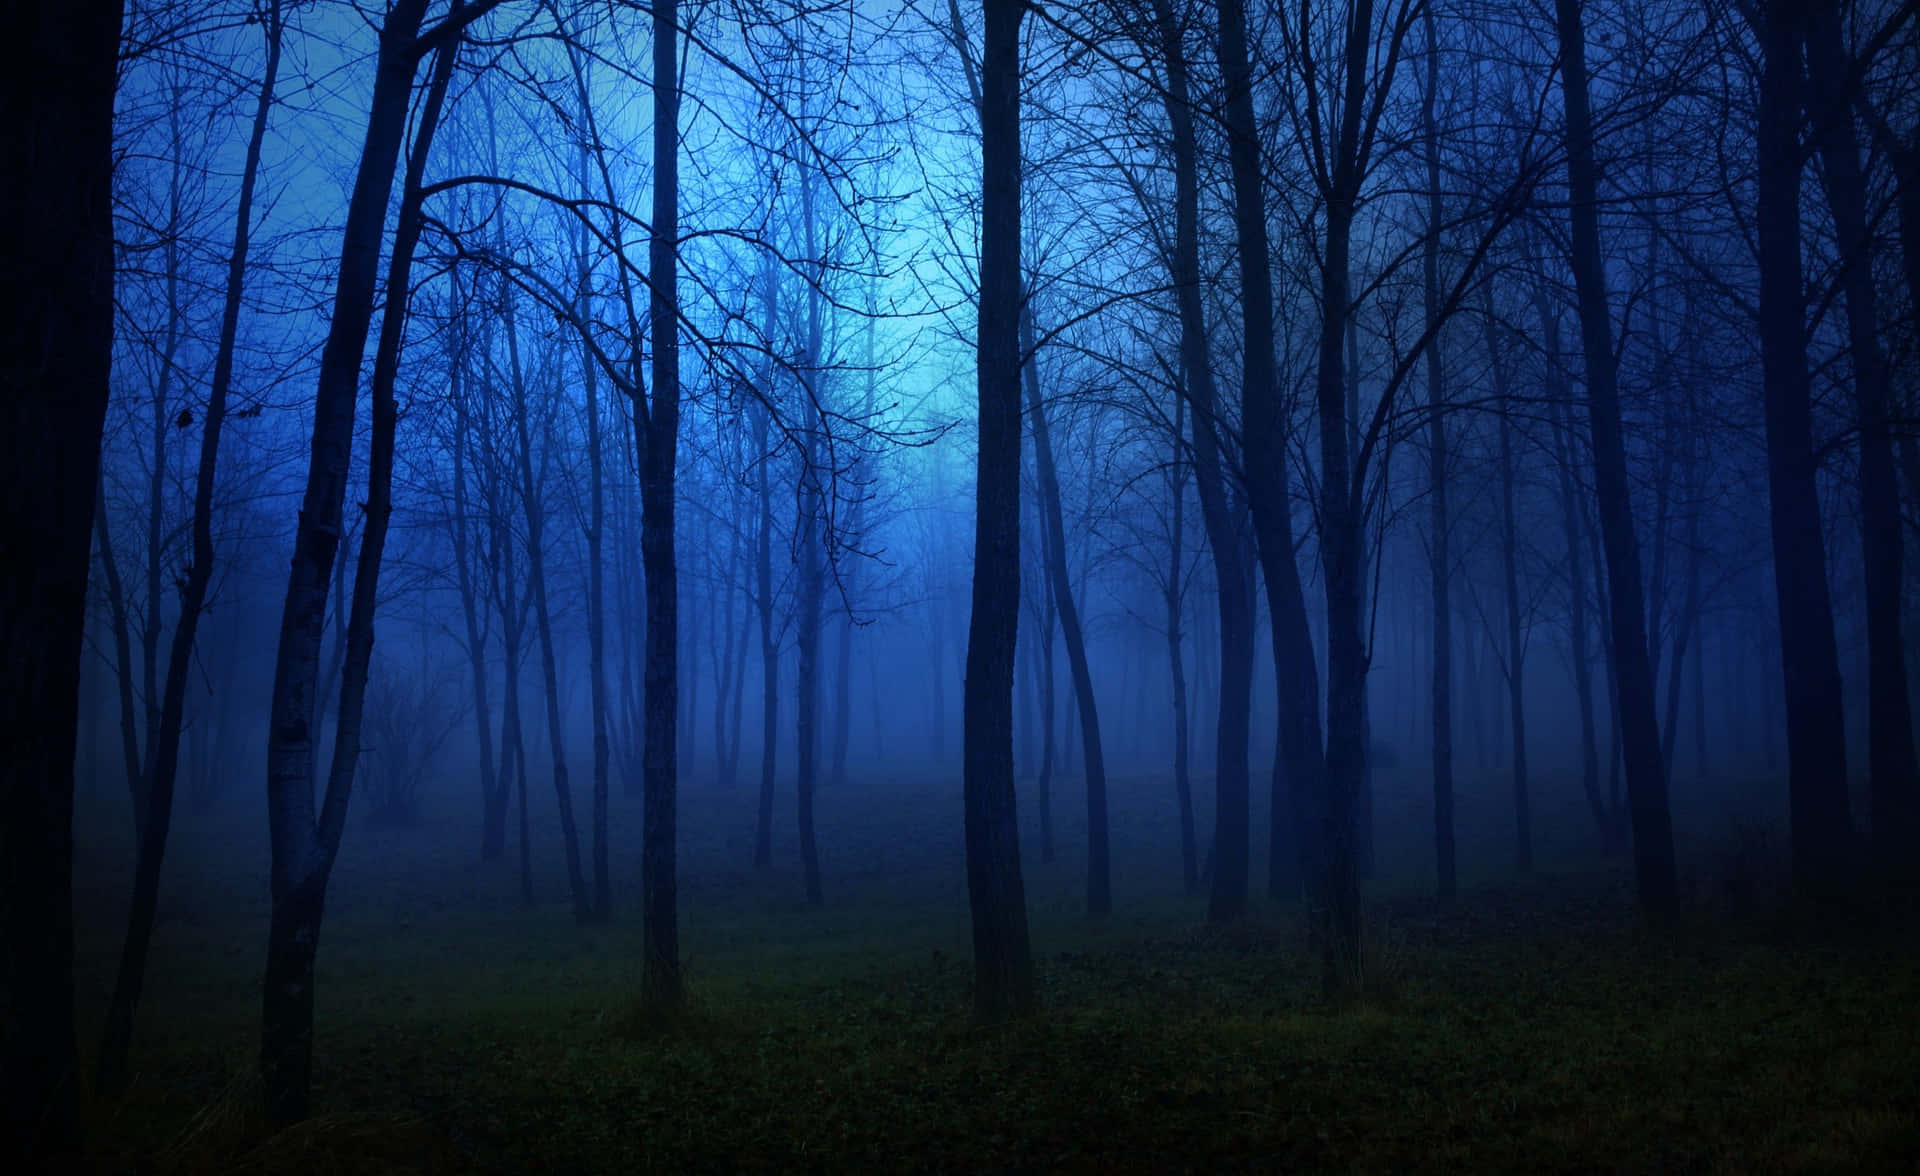 “A tranquil night in the forest” Wallpaper